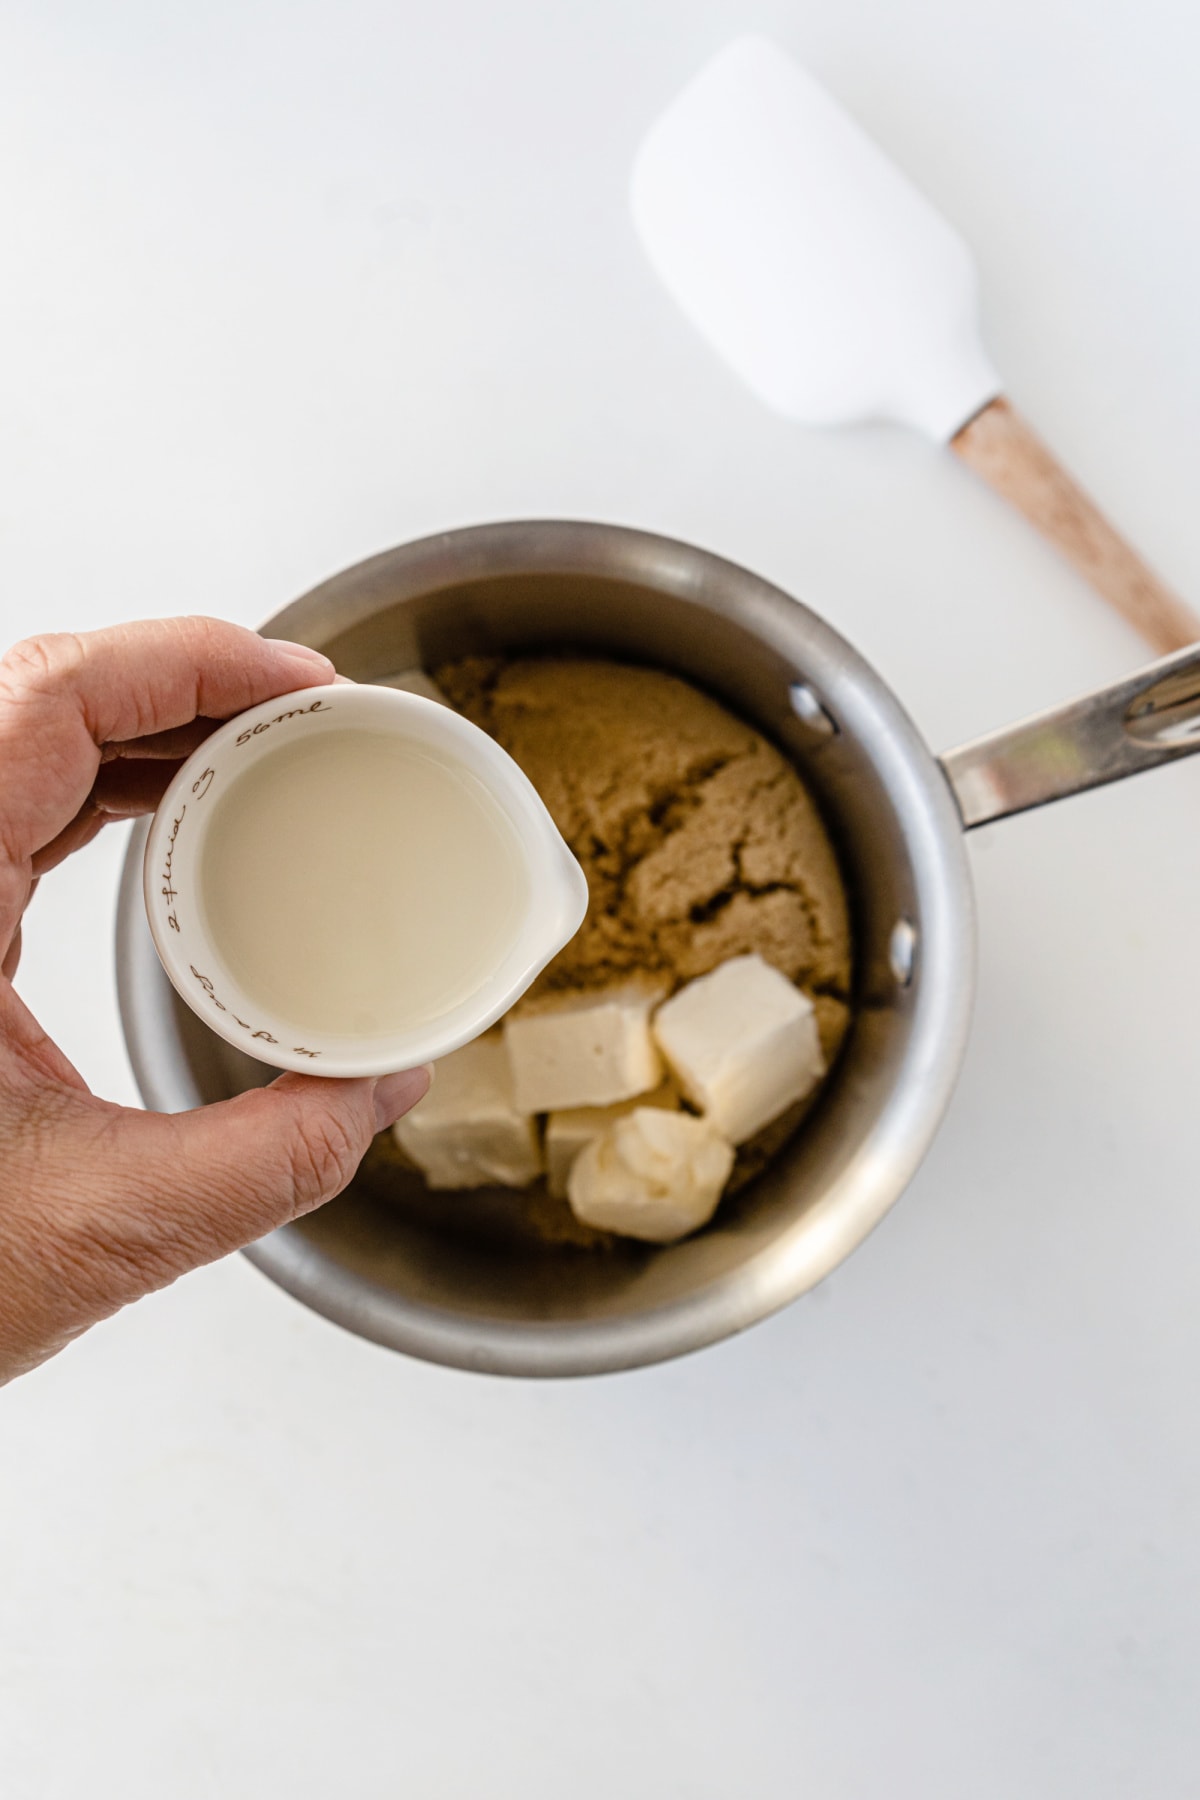 Brown sugar and butter in a mixing bowl with cup of cream